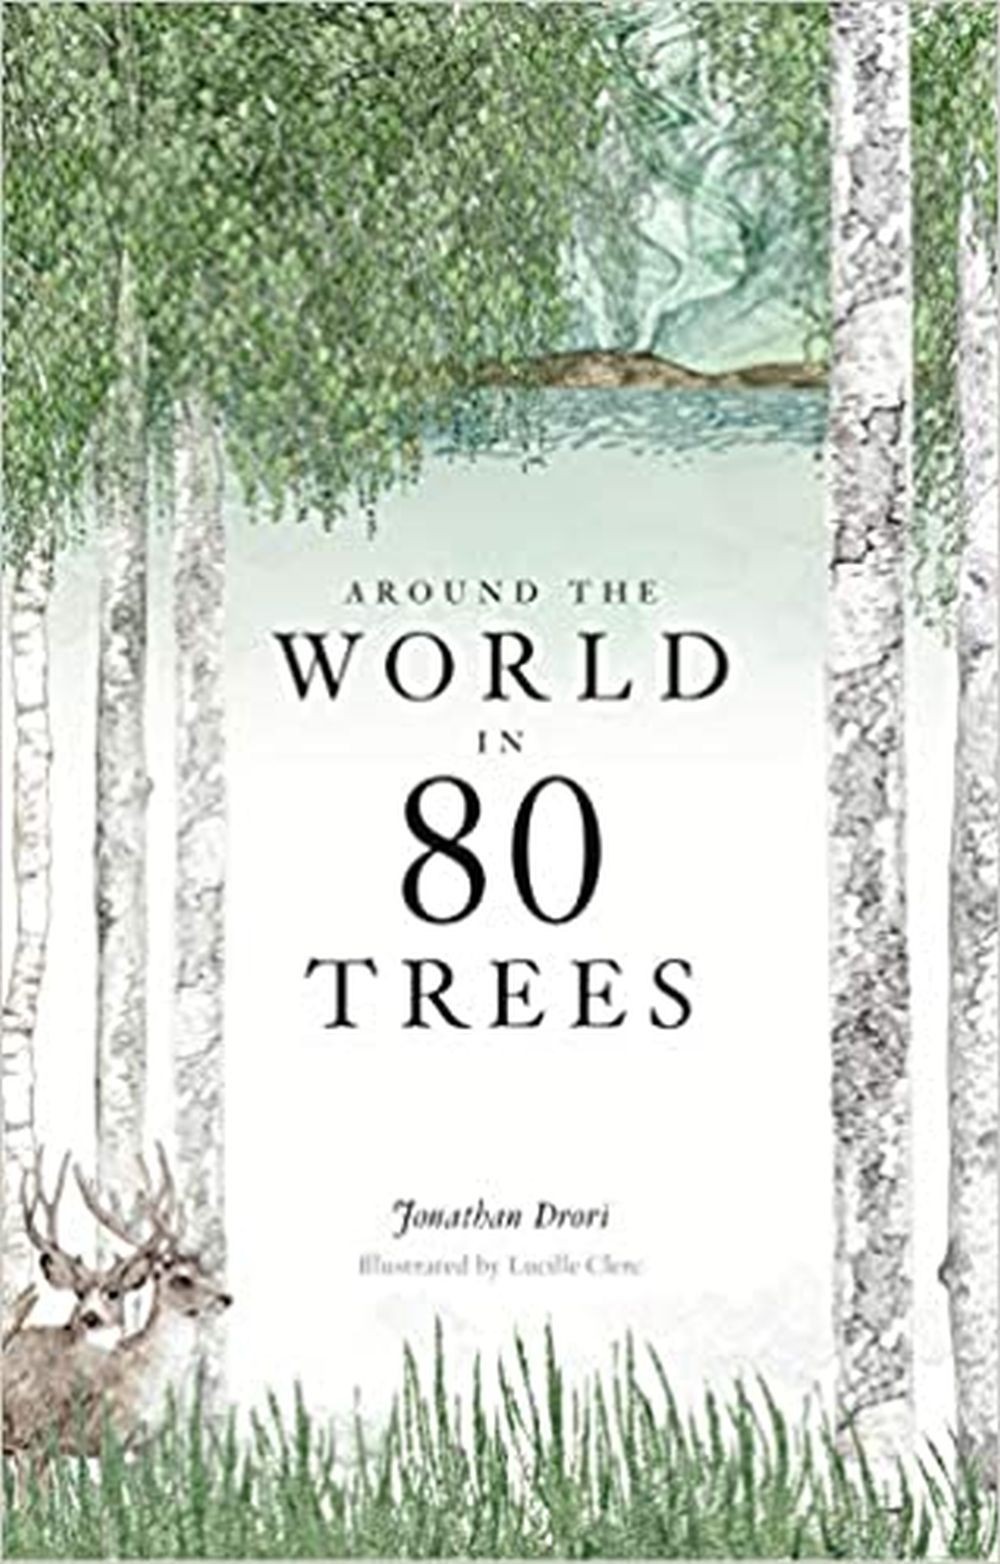 Around the World in 80 Trees: Discover the secretive world of trees 